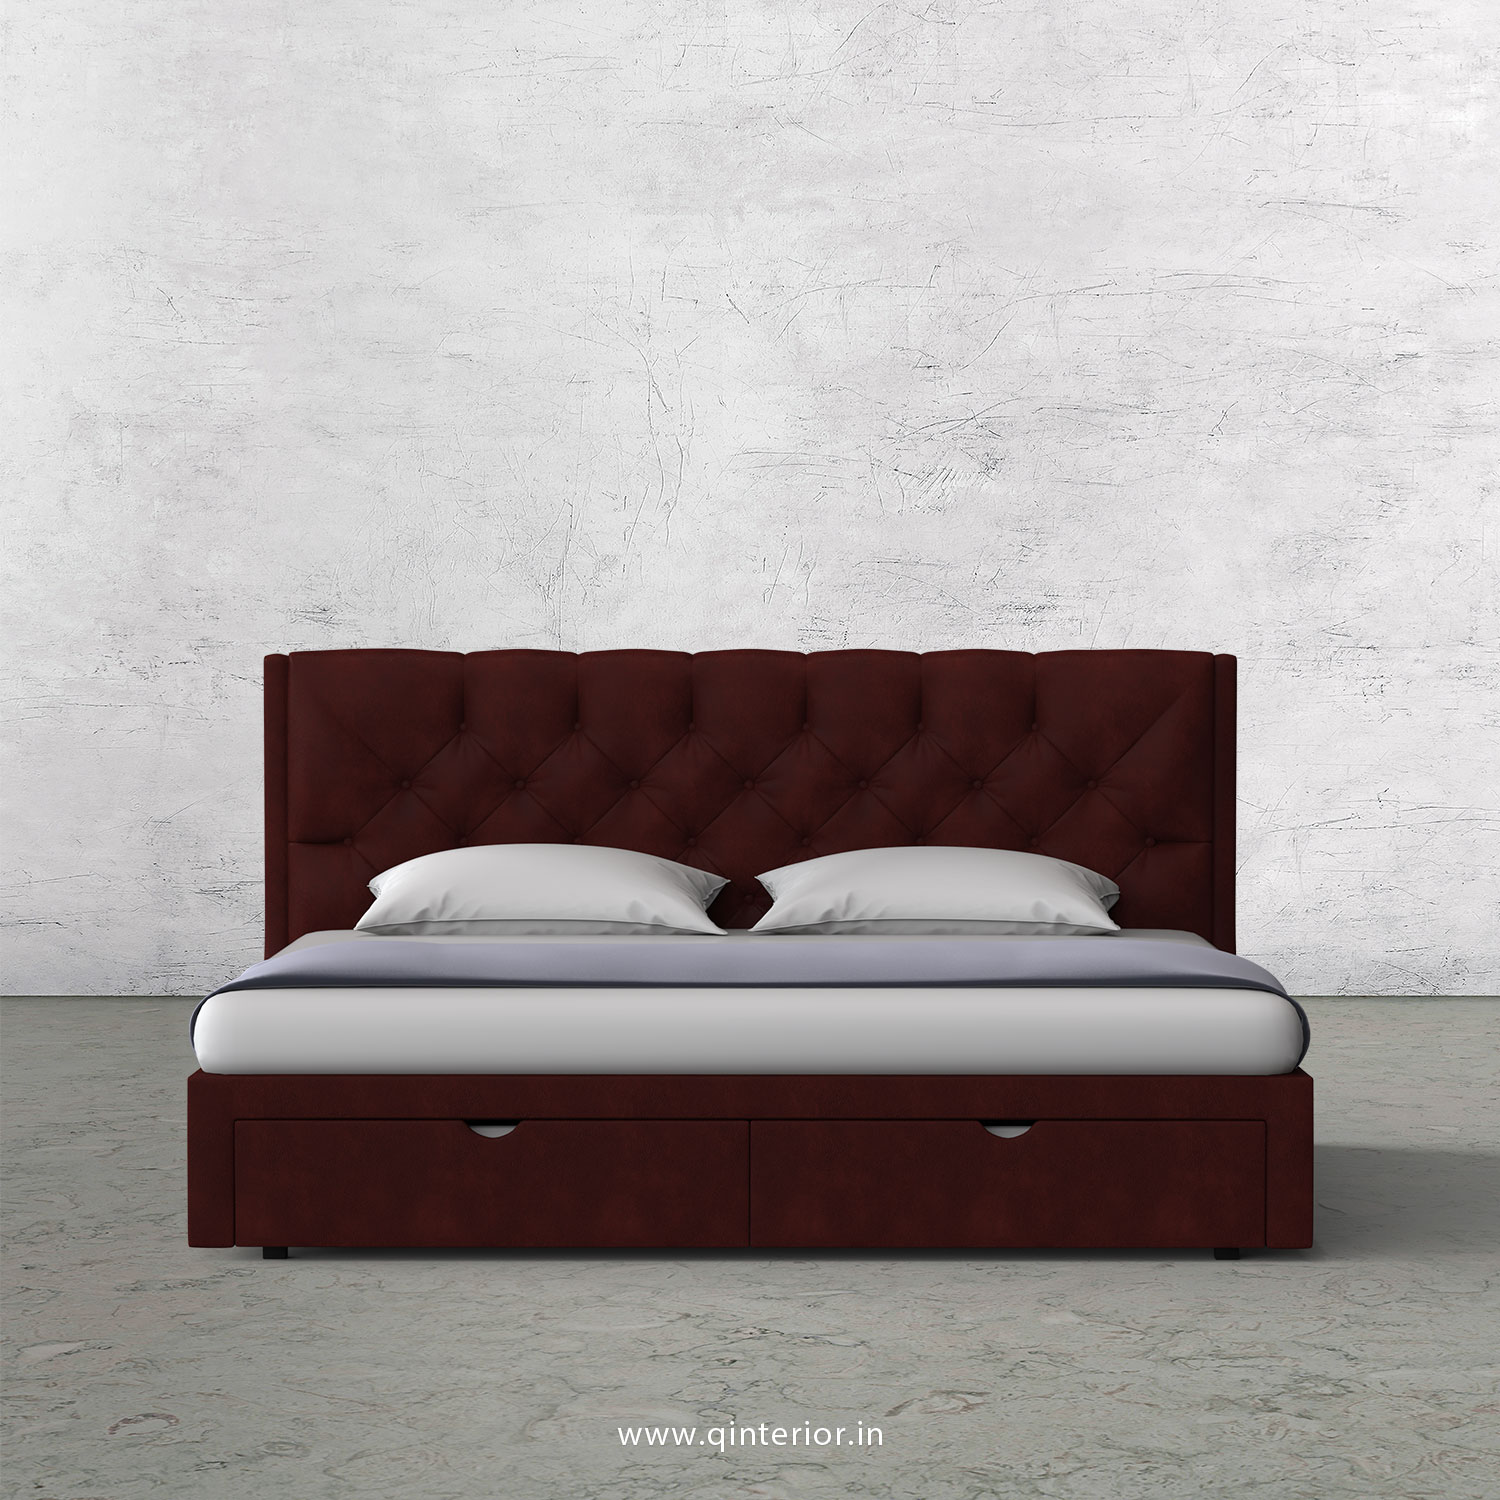 Scorpius King Size Storage Bed in Fab Leather Fabric - KBD001 FL17